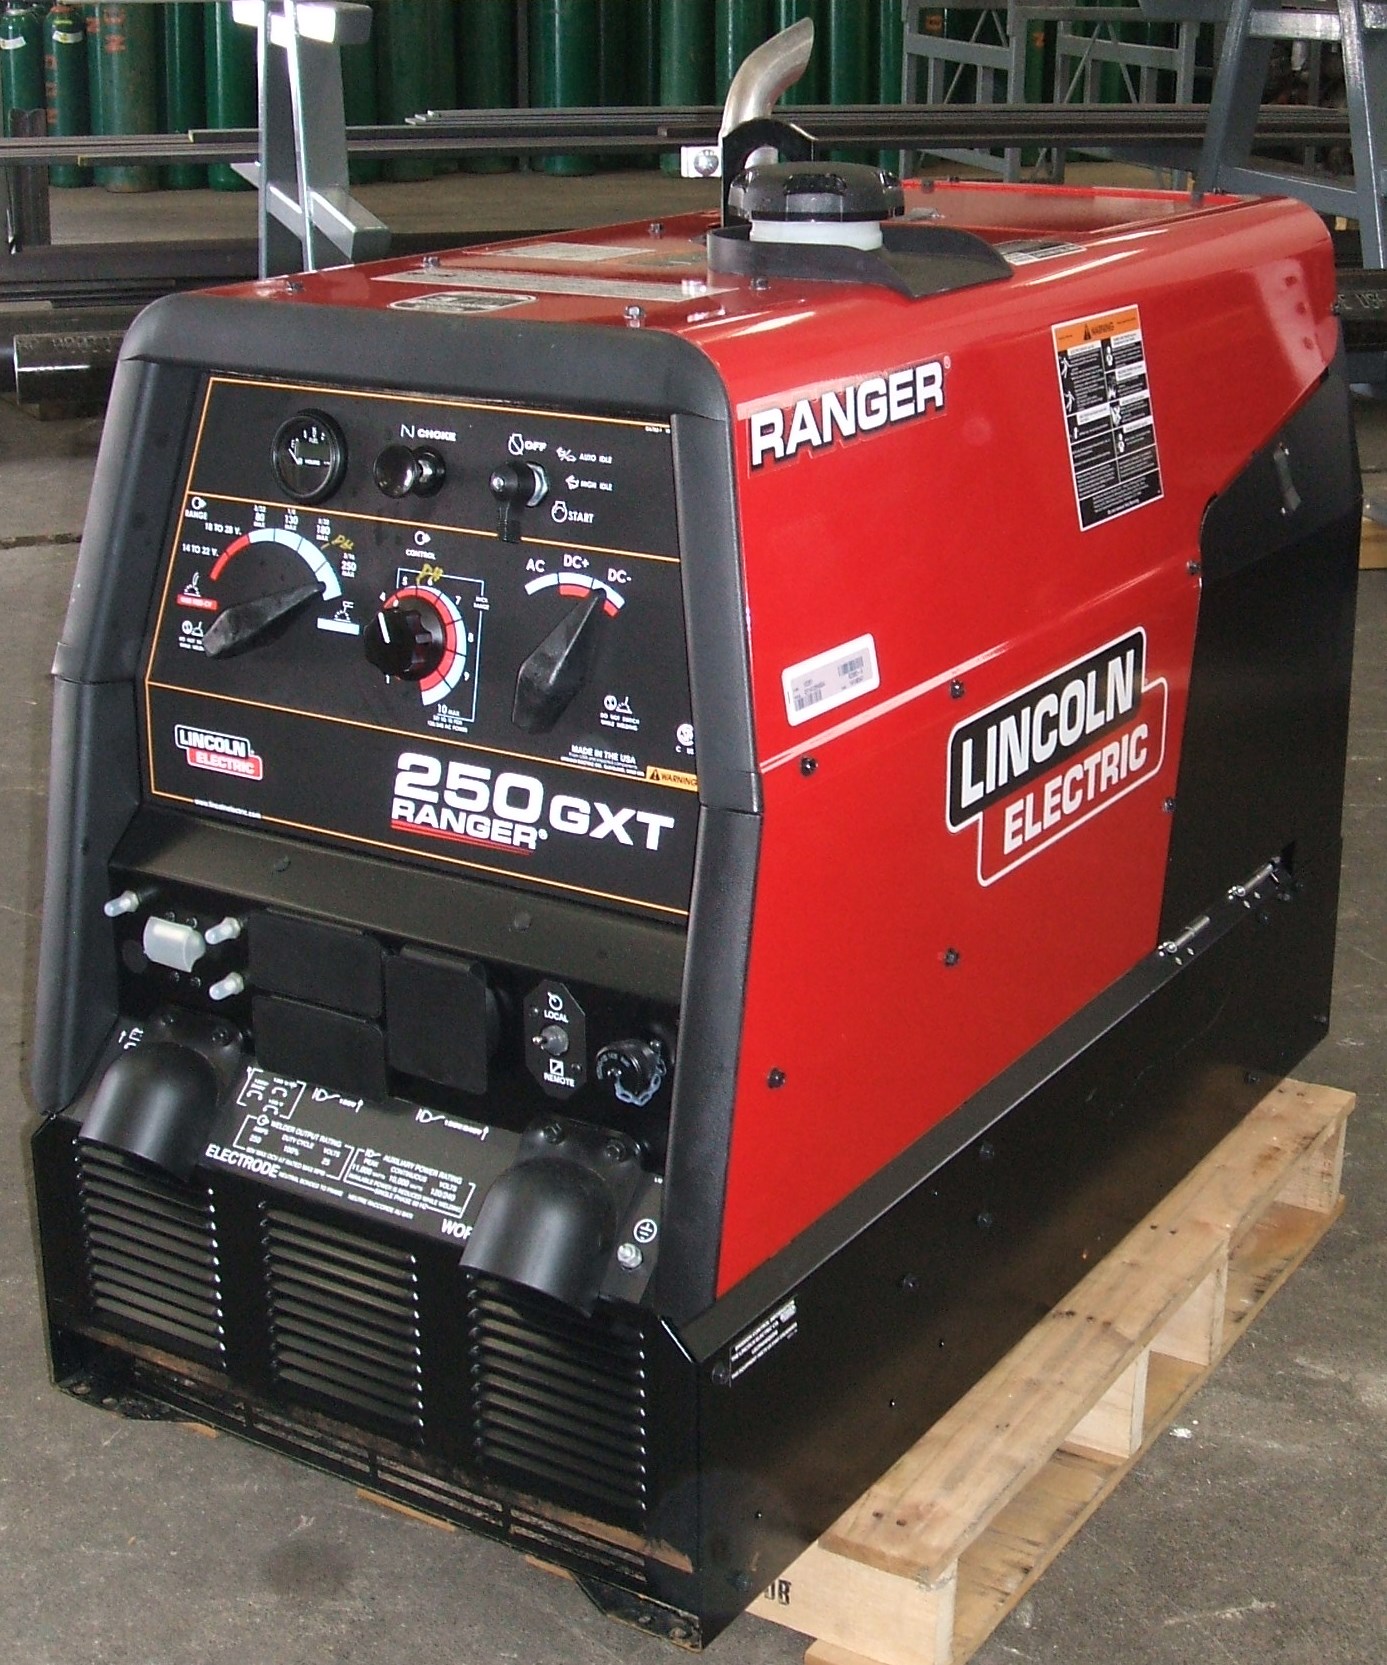 Recently Sold Used Welders. More still Available and ...